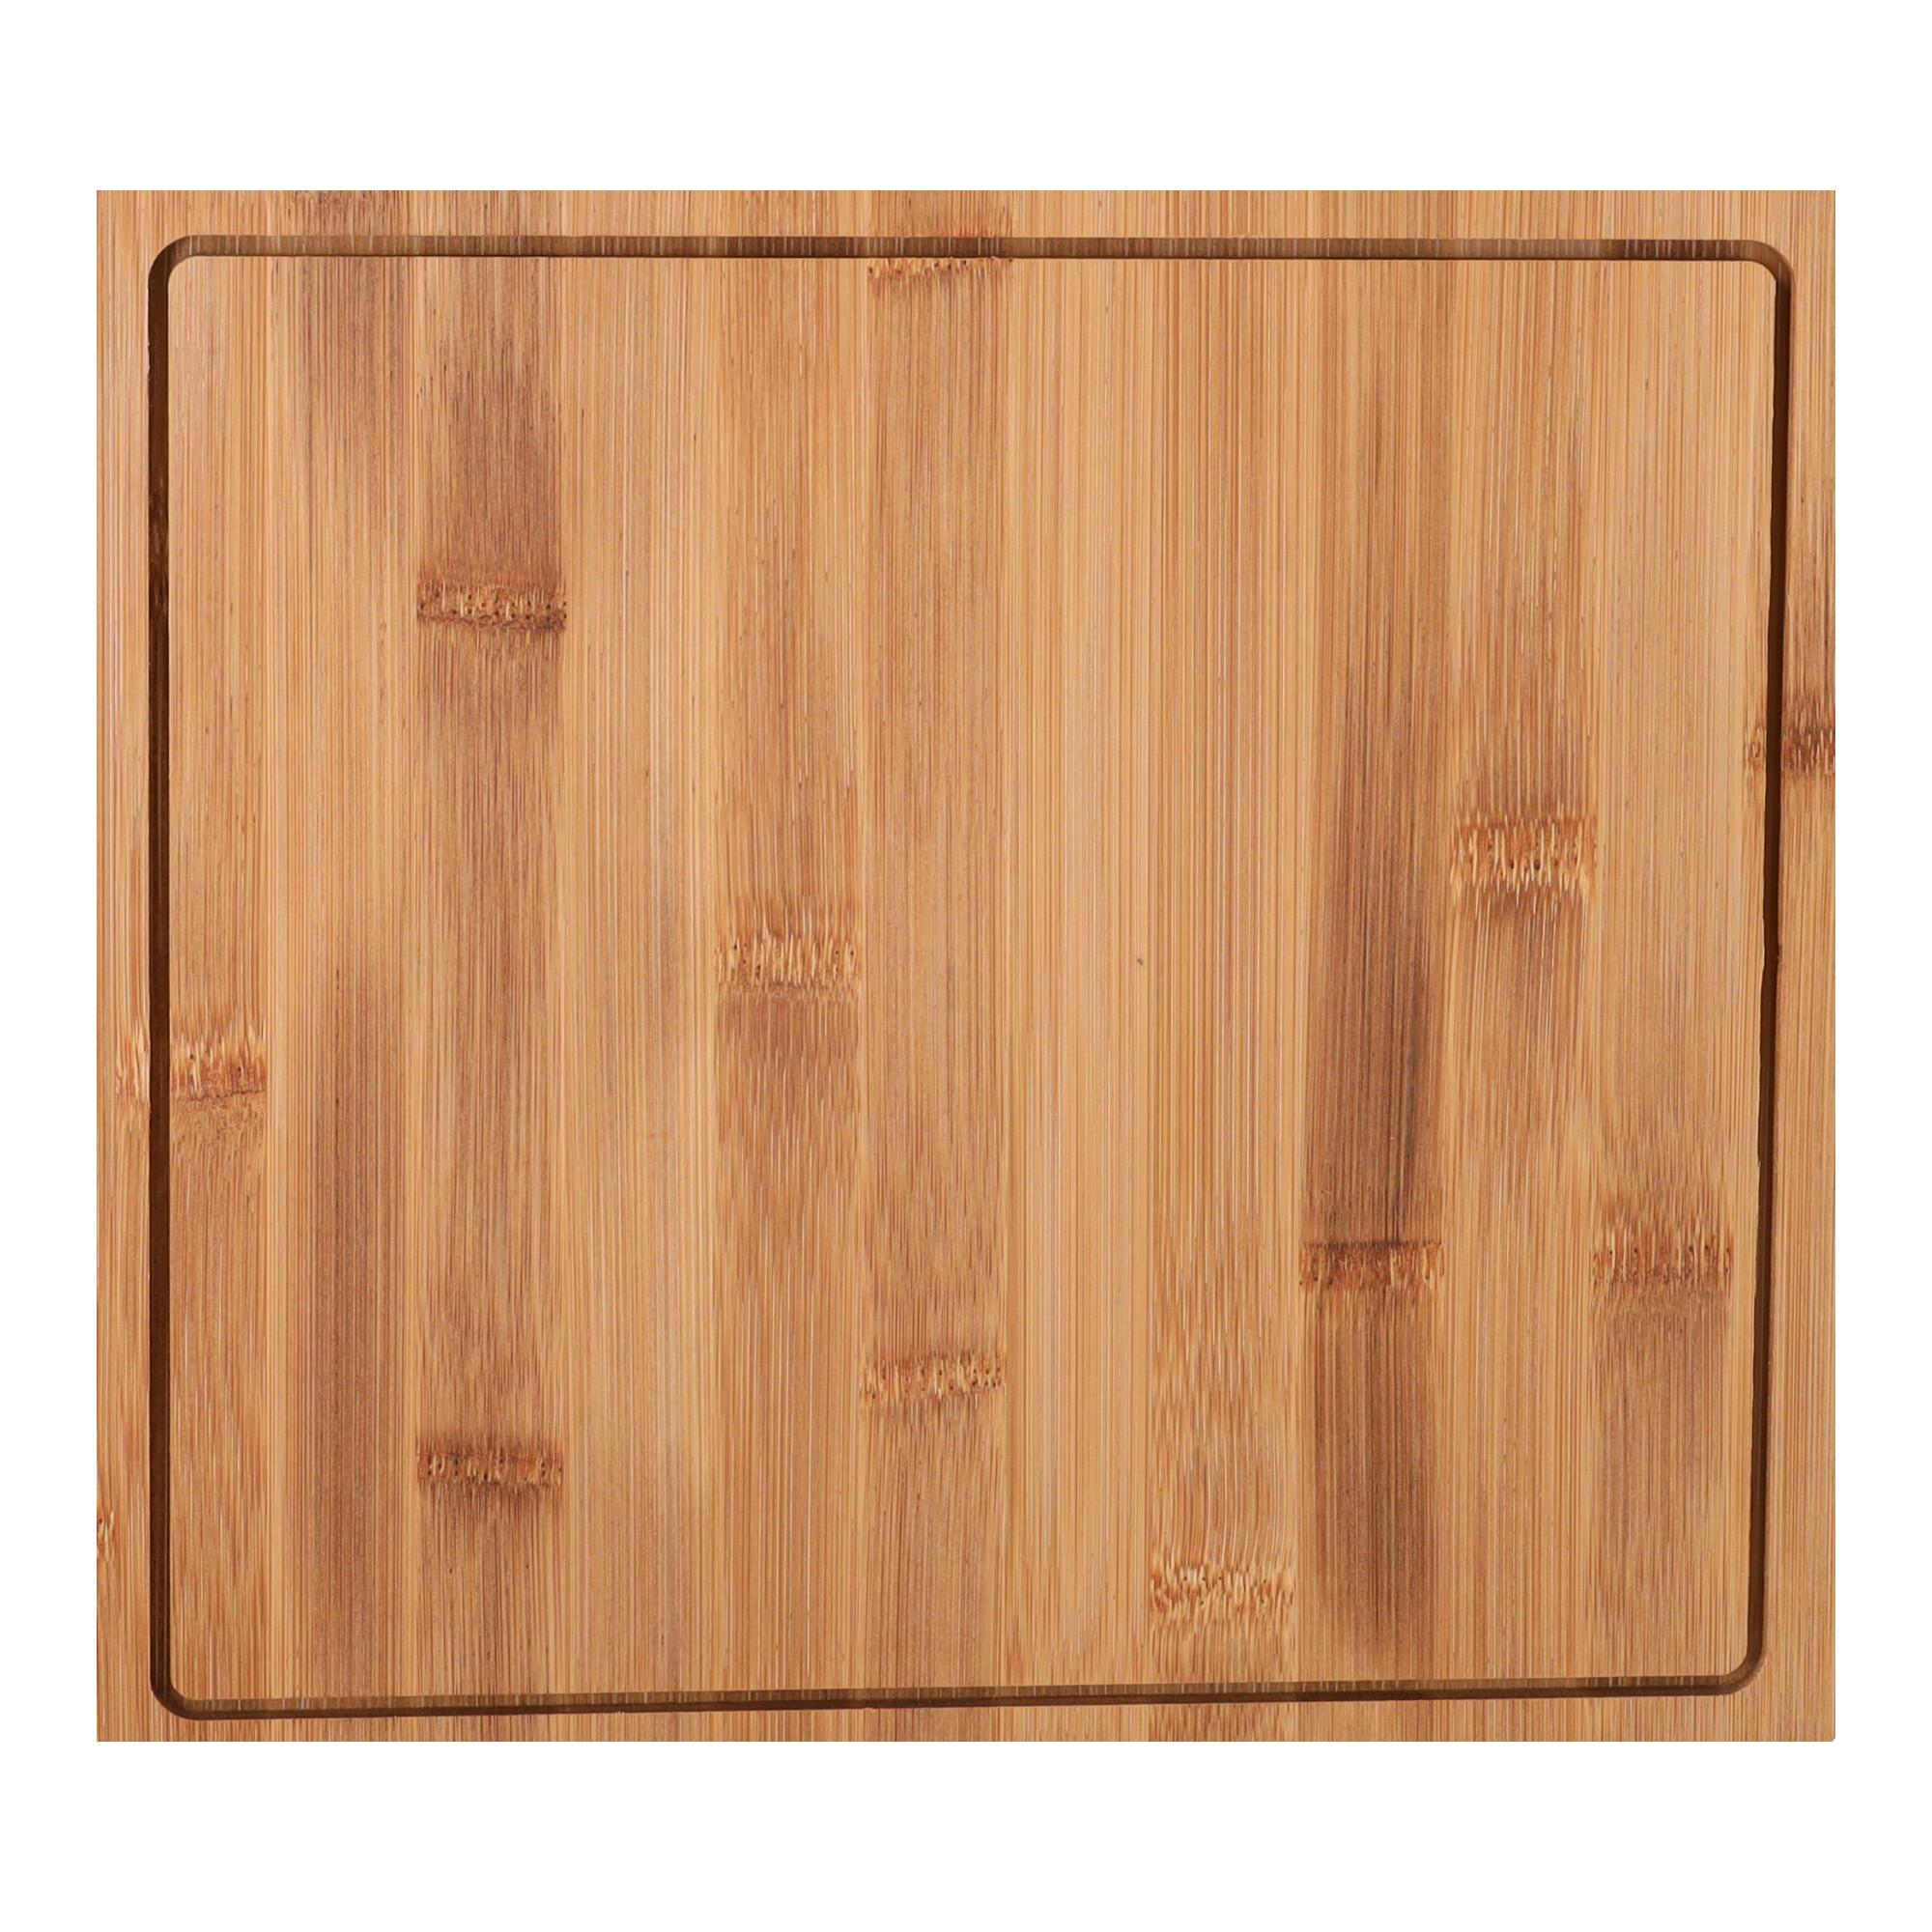 Wooden pizza board - square, large